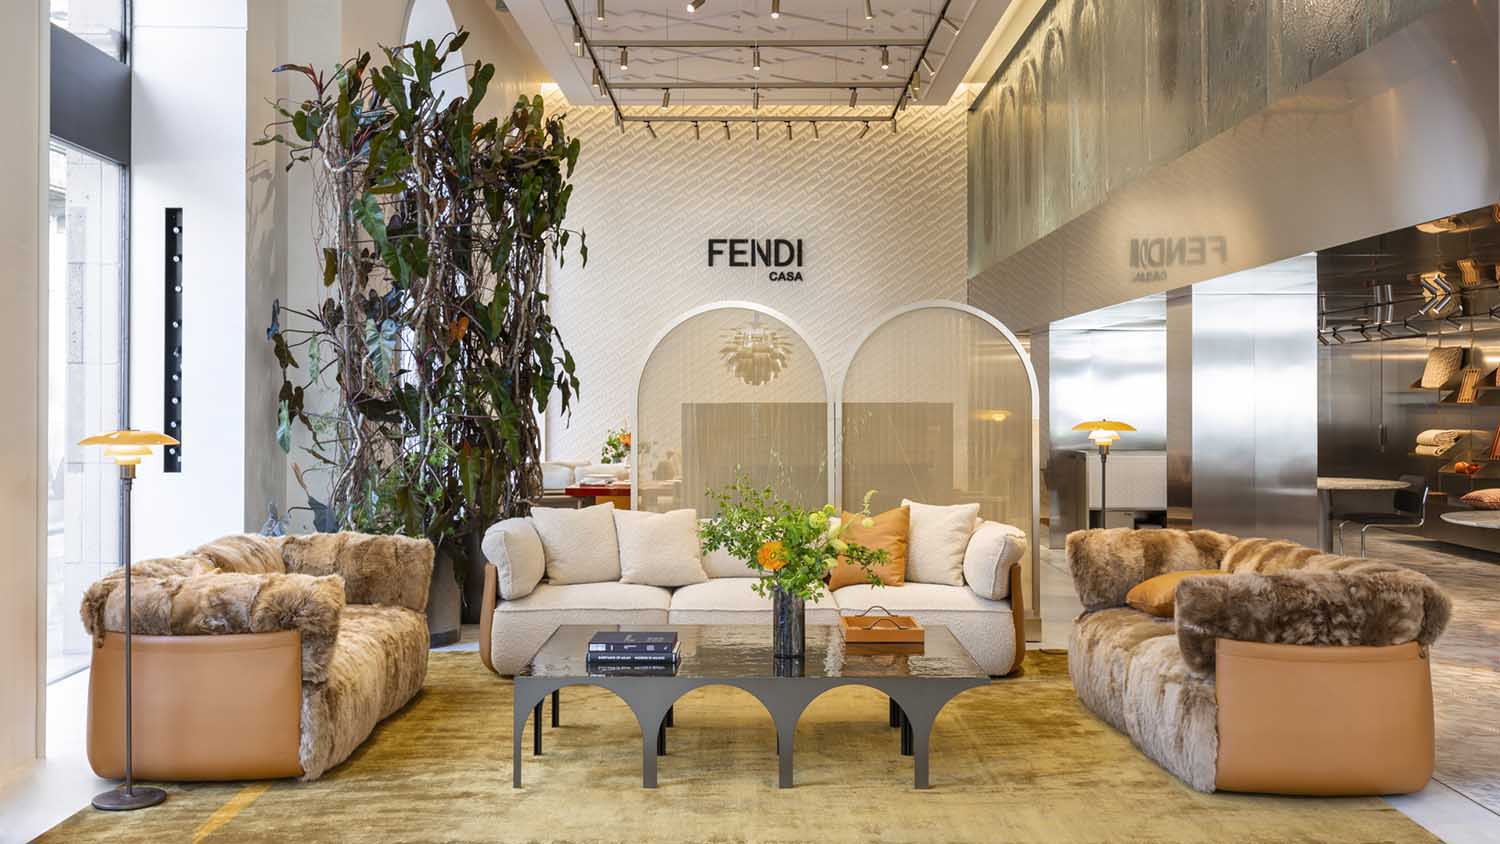 View of the Fendi store in Beverly Hills on August 01, 2020 in Los